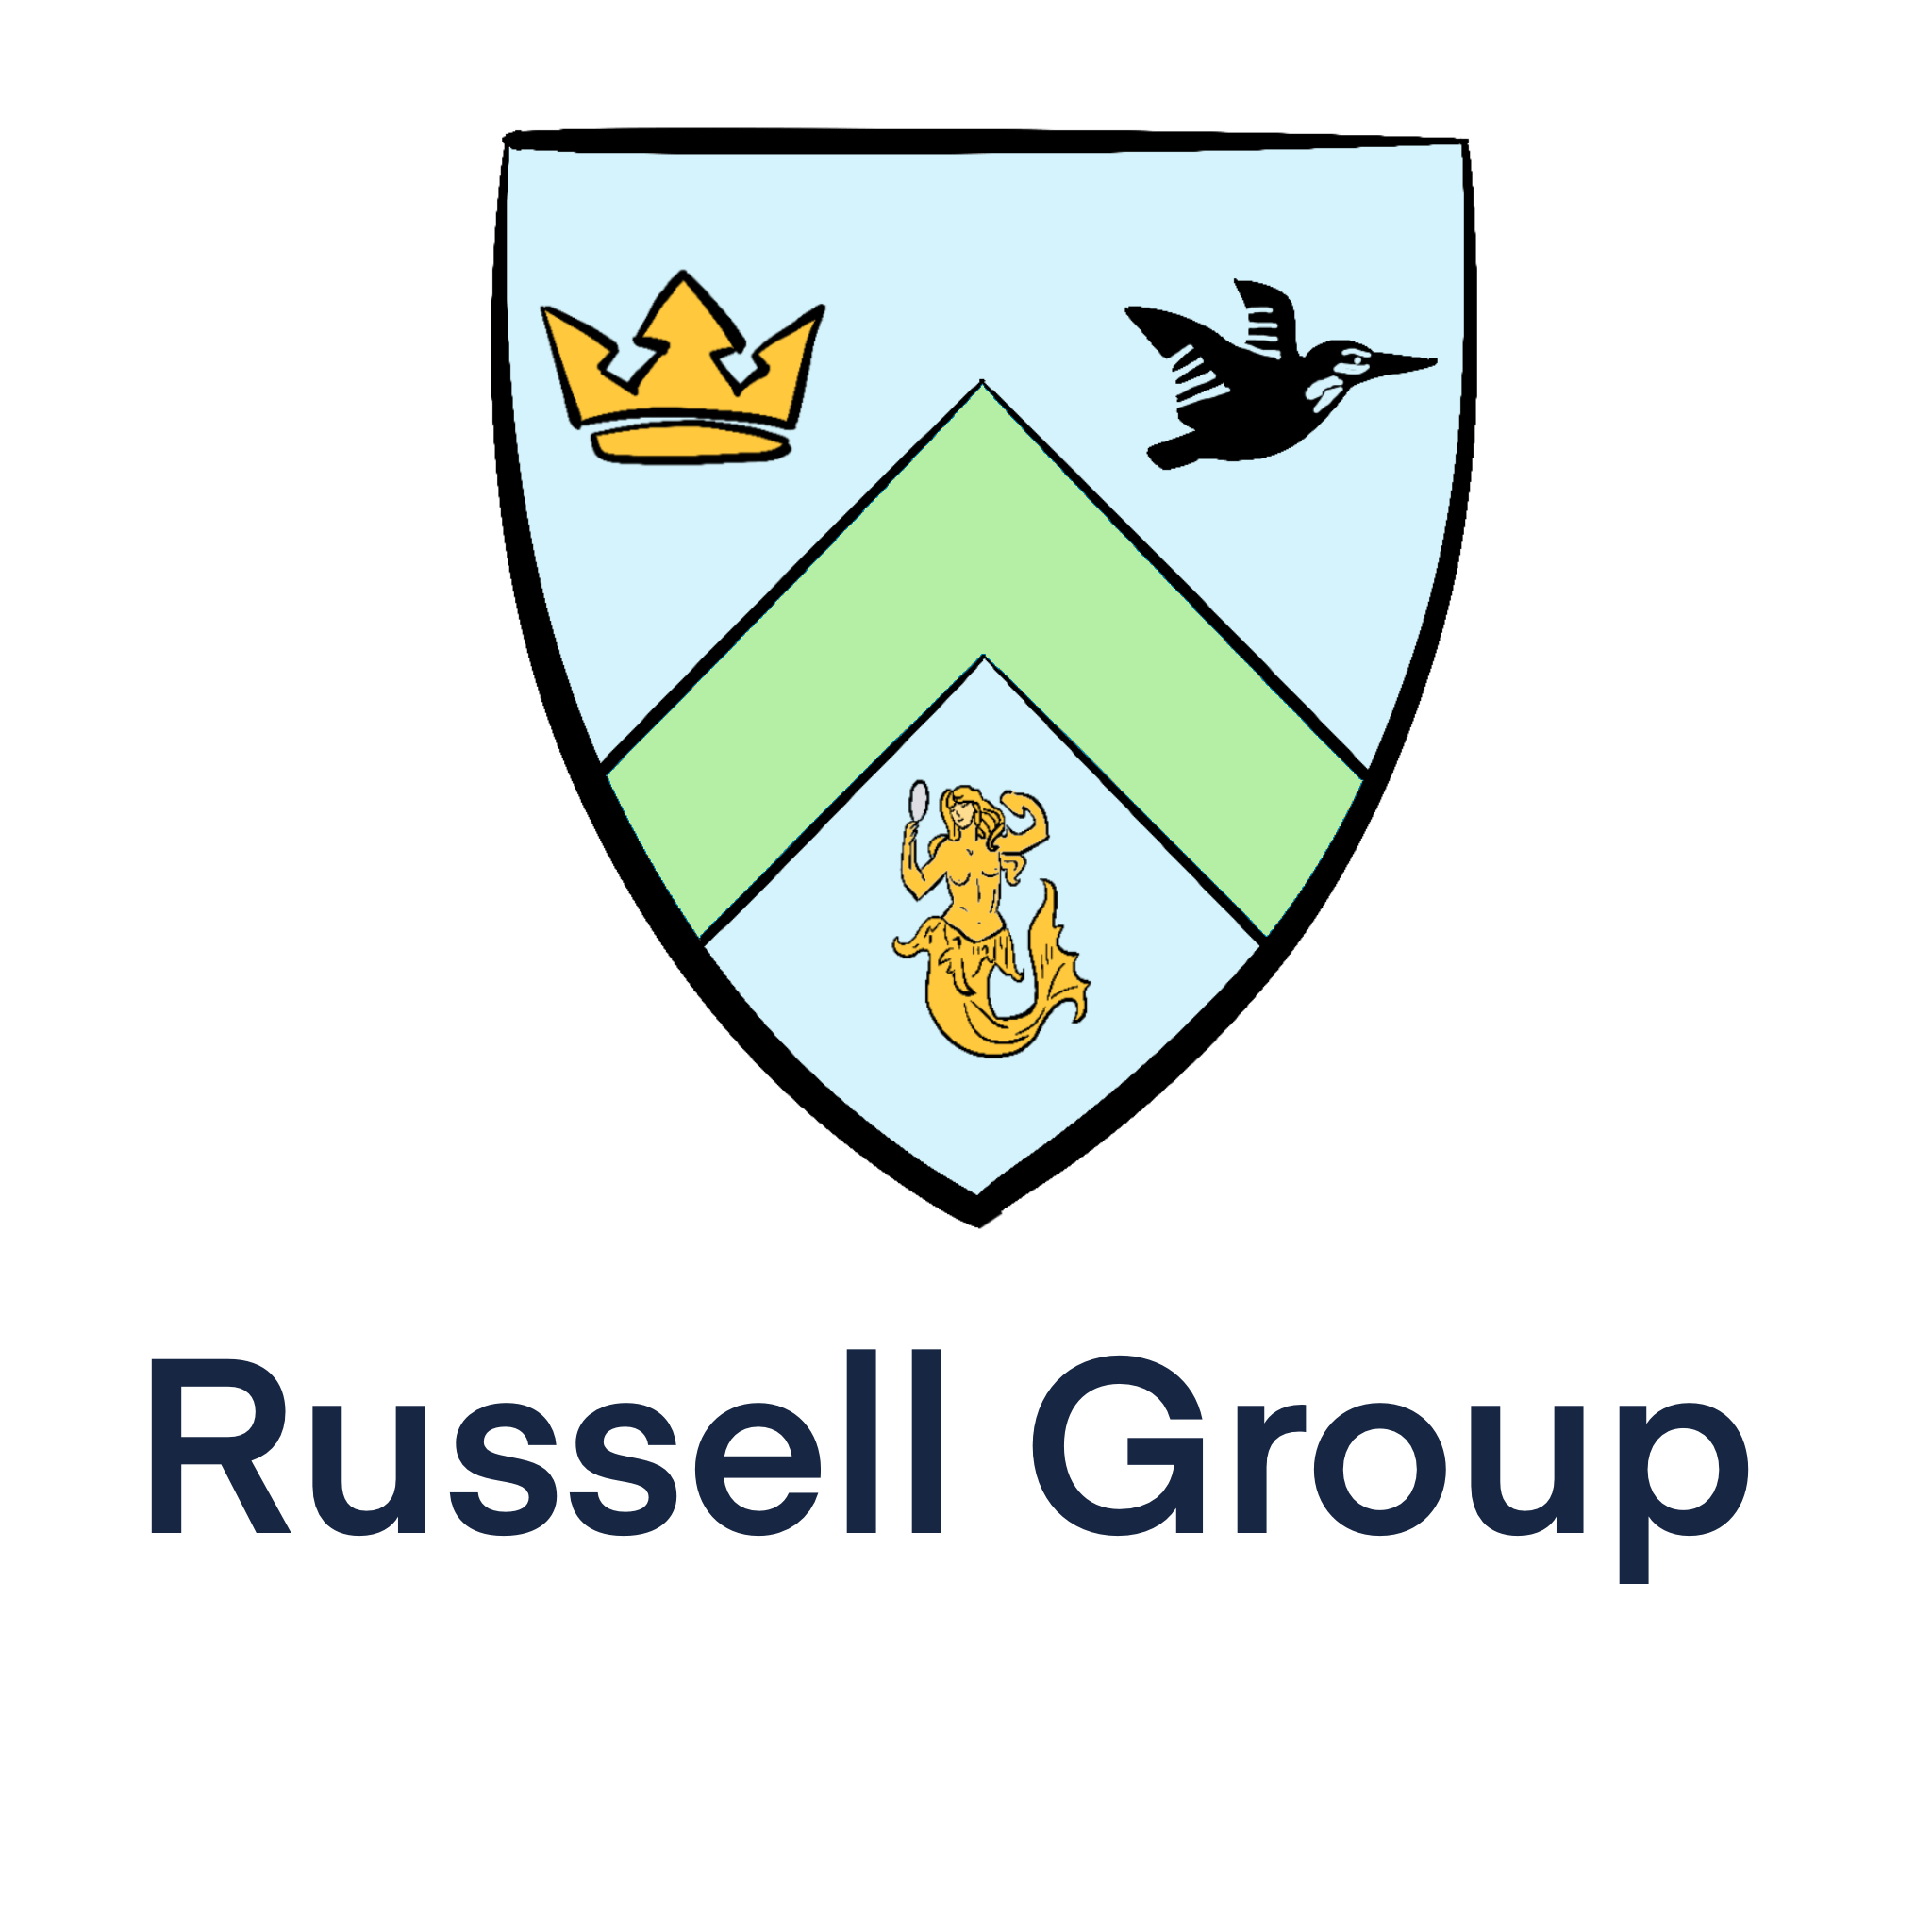 Isobel holds a degree from a Russell Group University